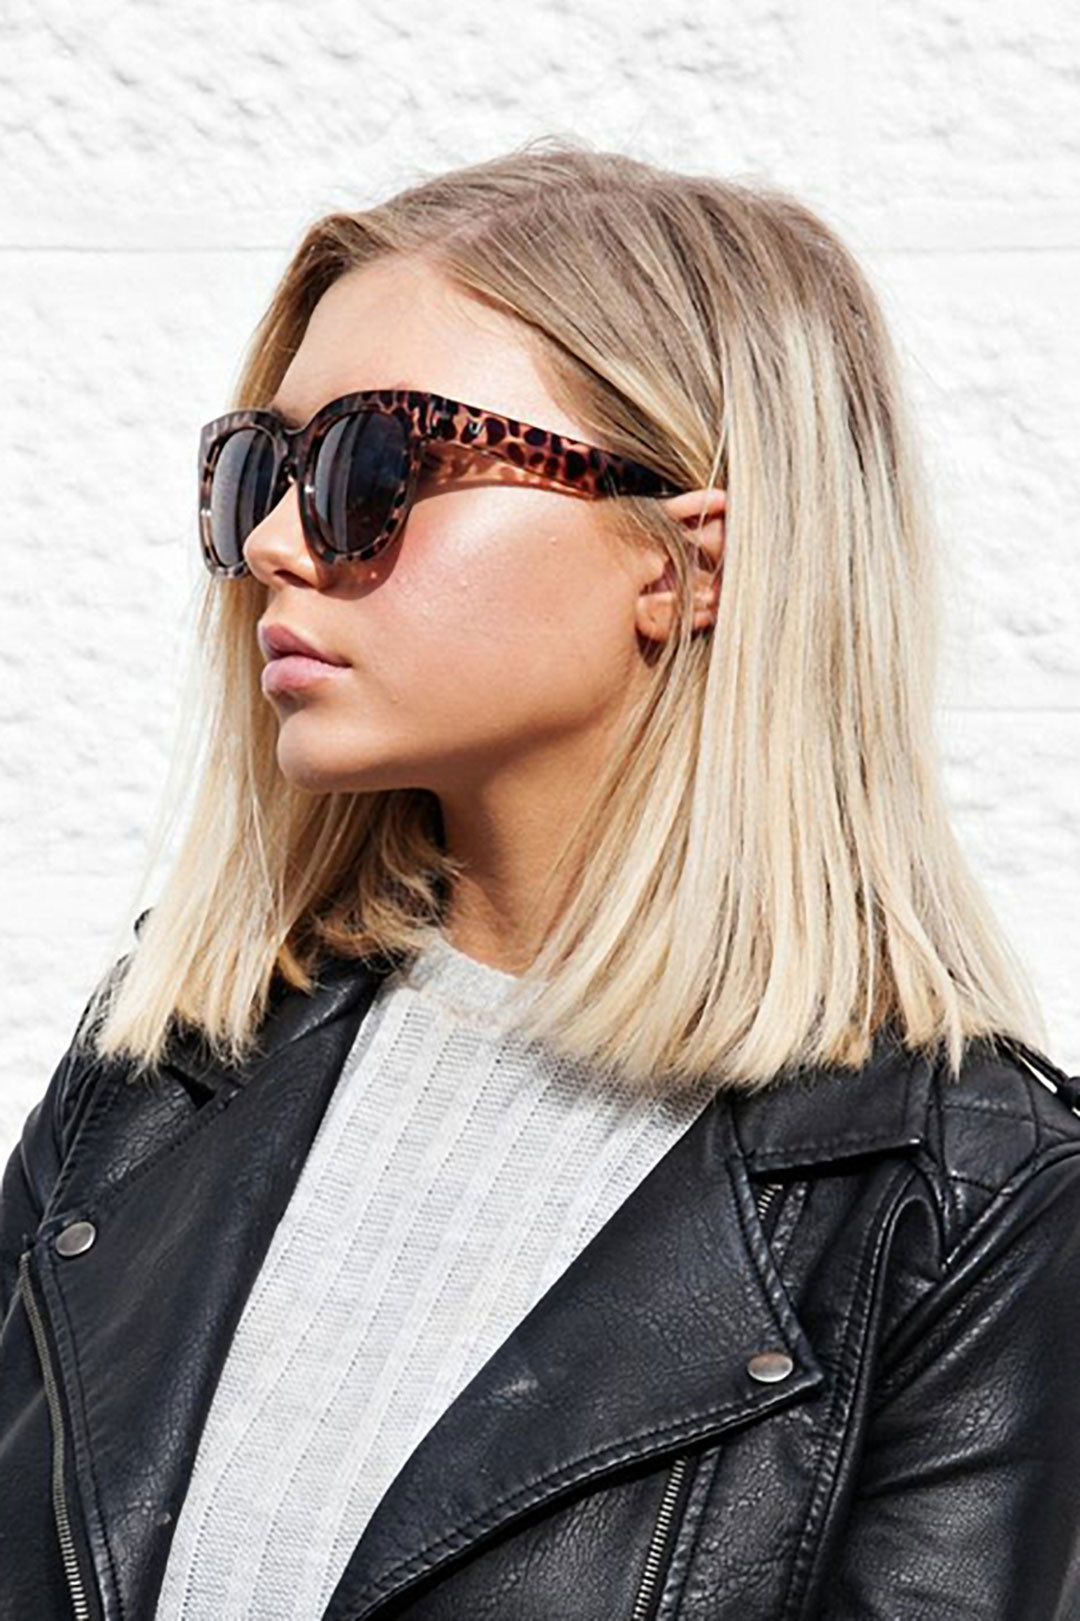 Young blonde lady in front of white wall wearing black leather jacket and large tortoiseshell sunglasses